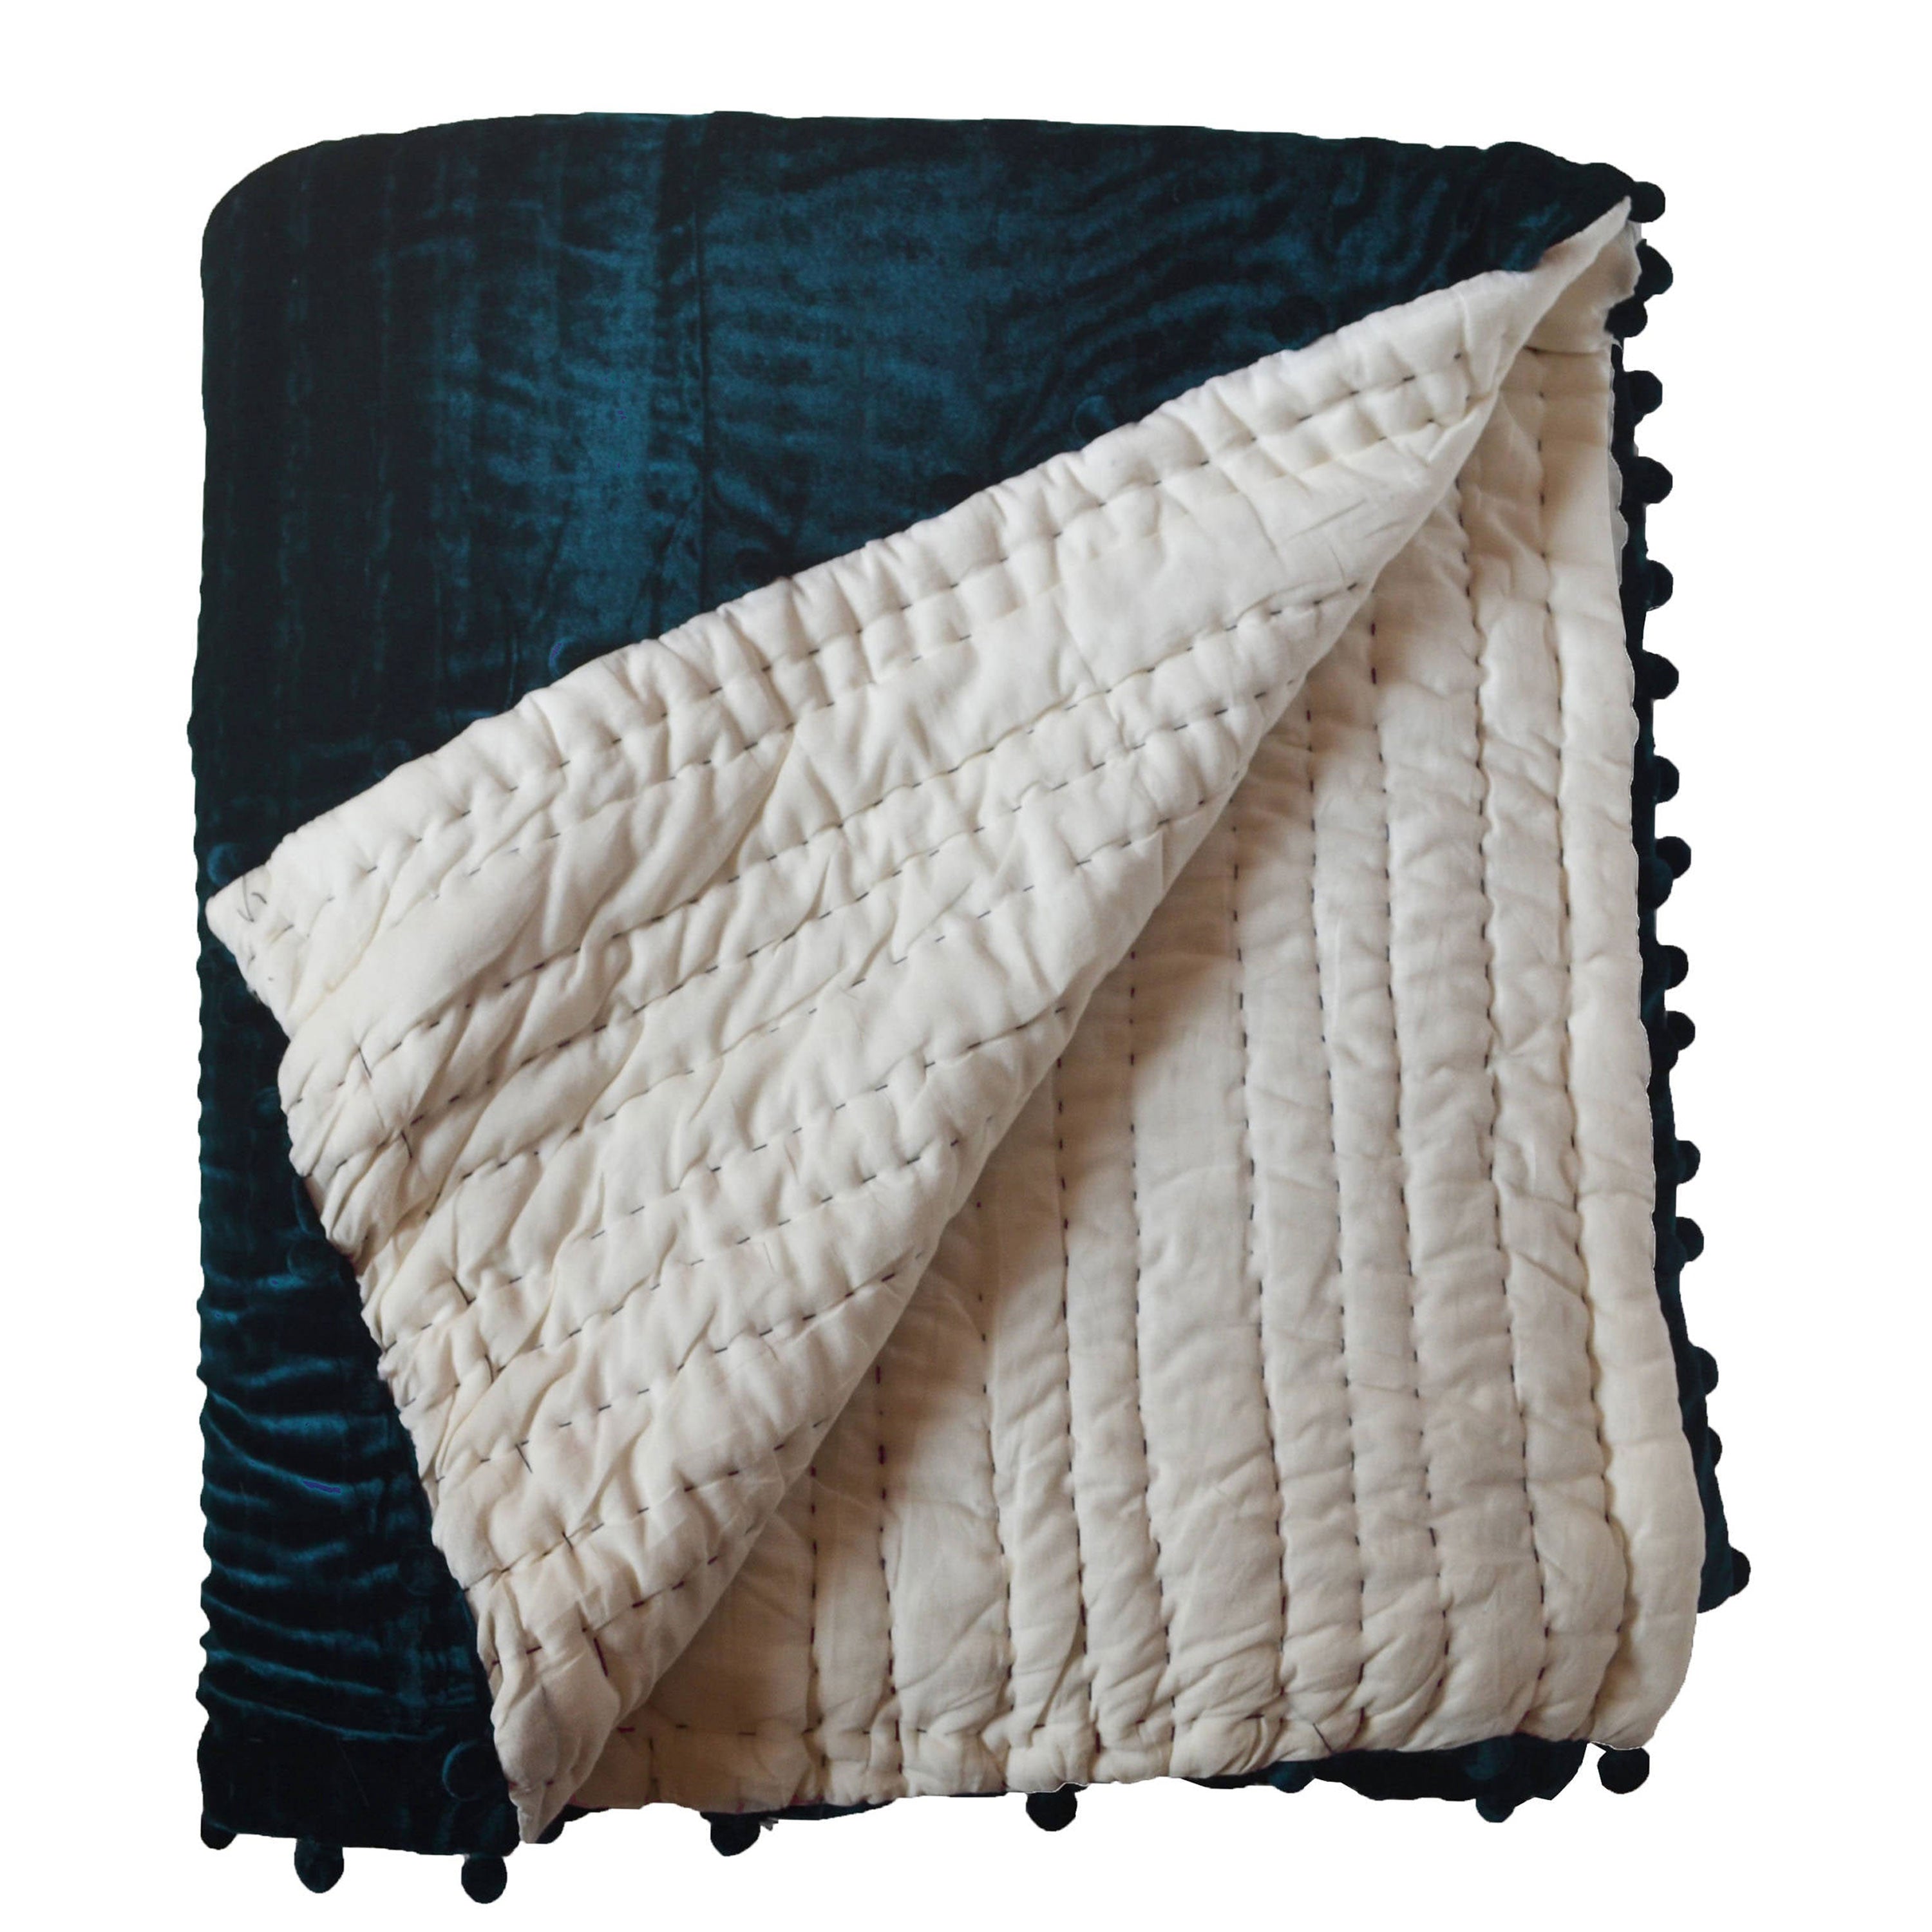 Teal Velvet Quilts, Handcrafted Custom Quilts - All Sizes